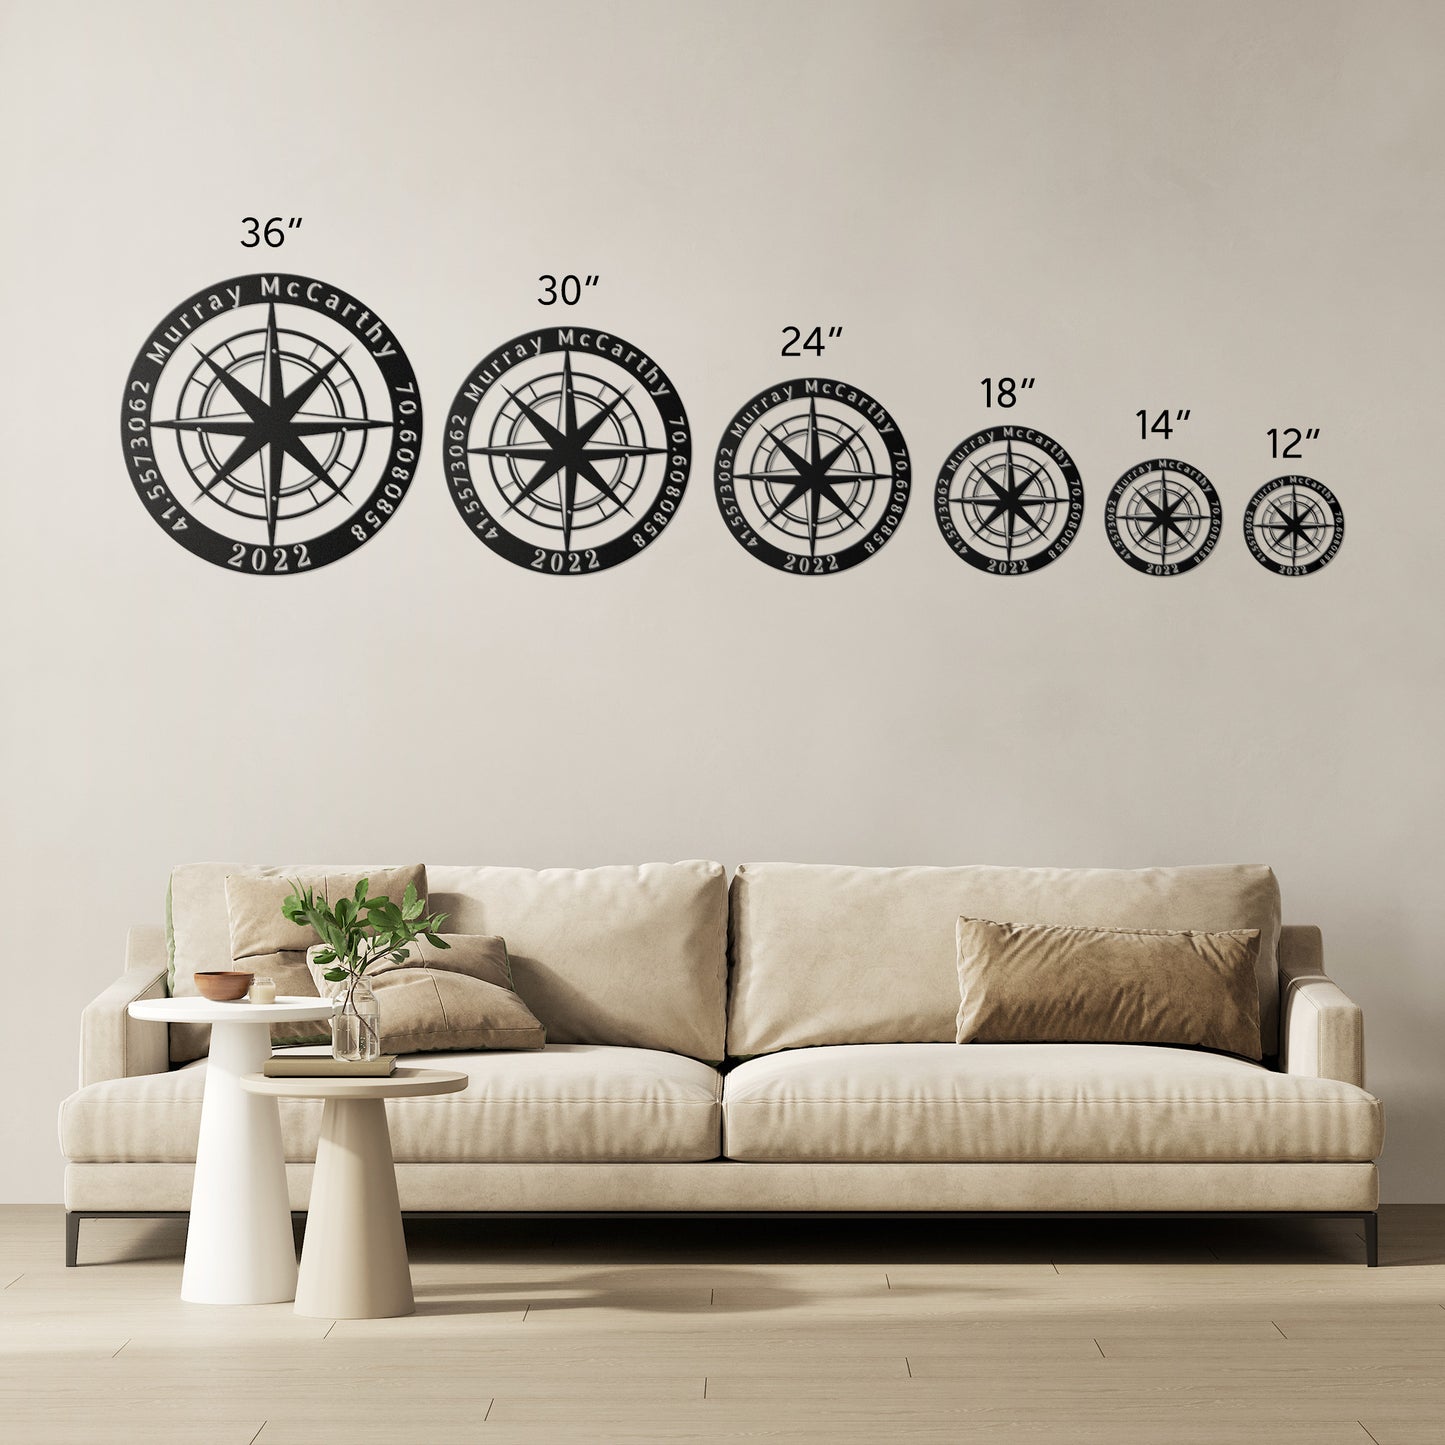 Personalized Custom Compass Metal Sign Housewarming Gift Indoor/Outdoor Use Unique Home Decor Customizable Gift Wanderlust Wall Art